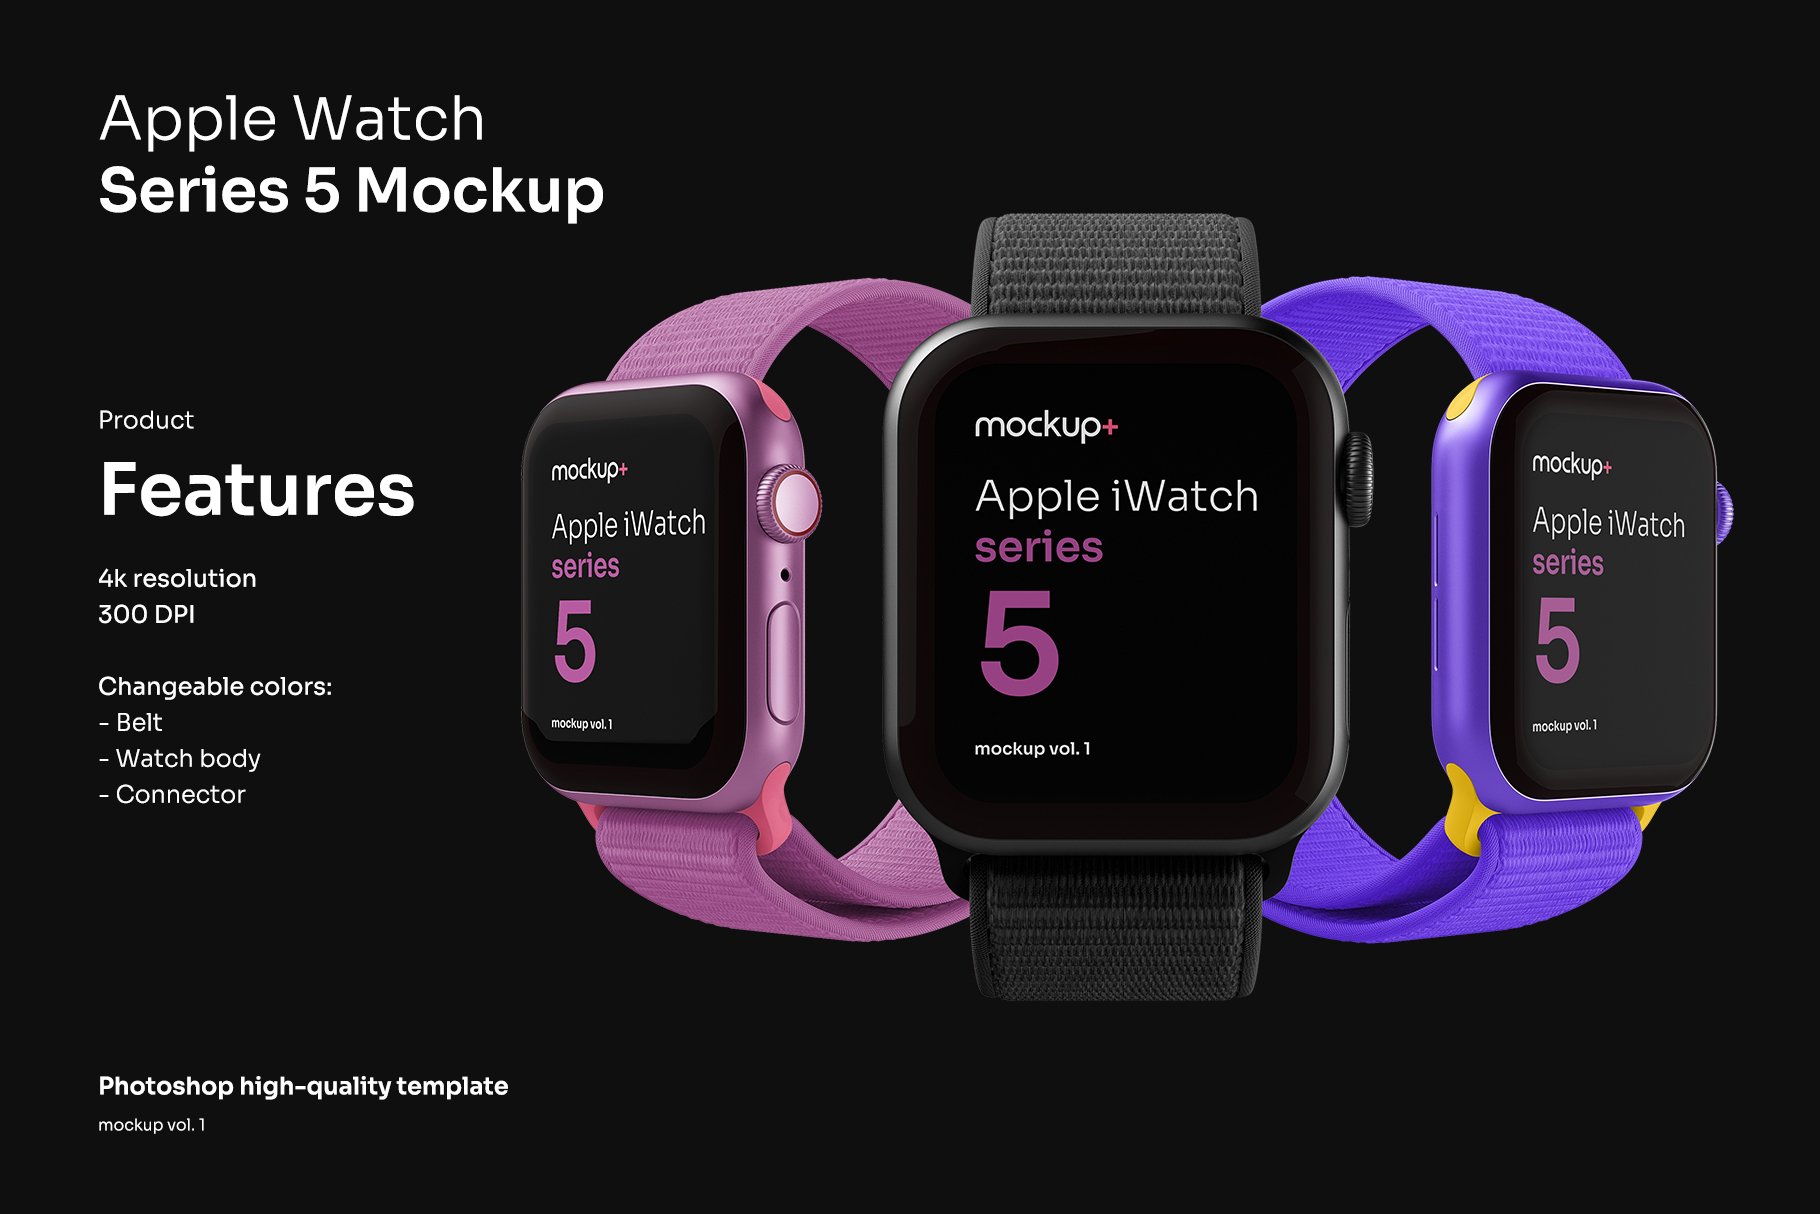 Apple Watch Series 5 Mockup cover image.